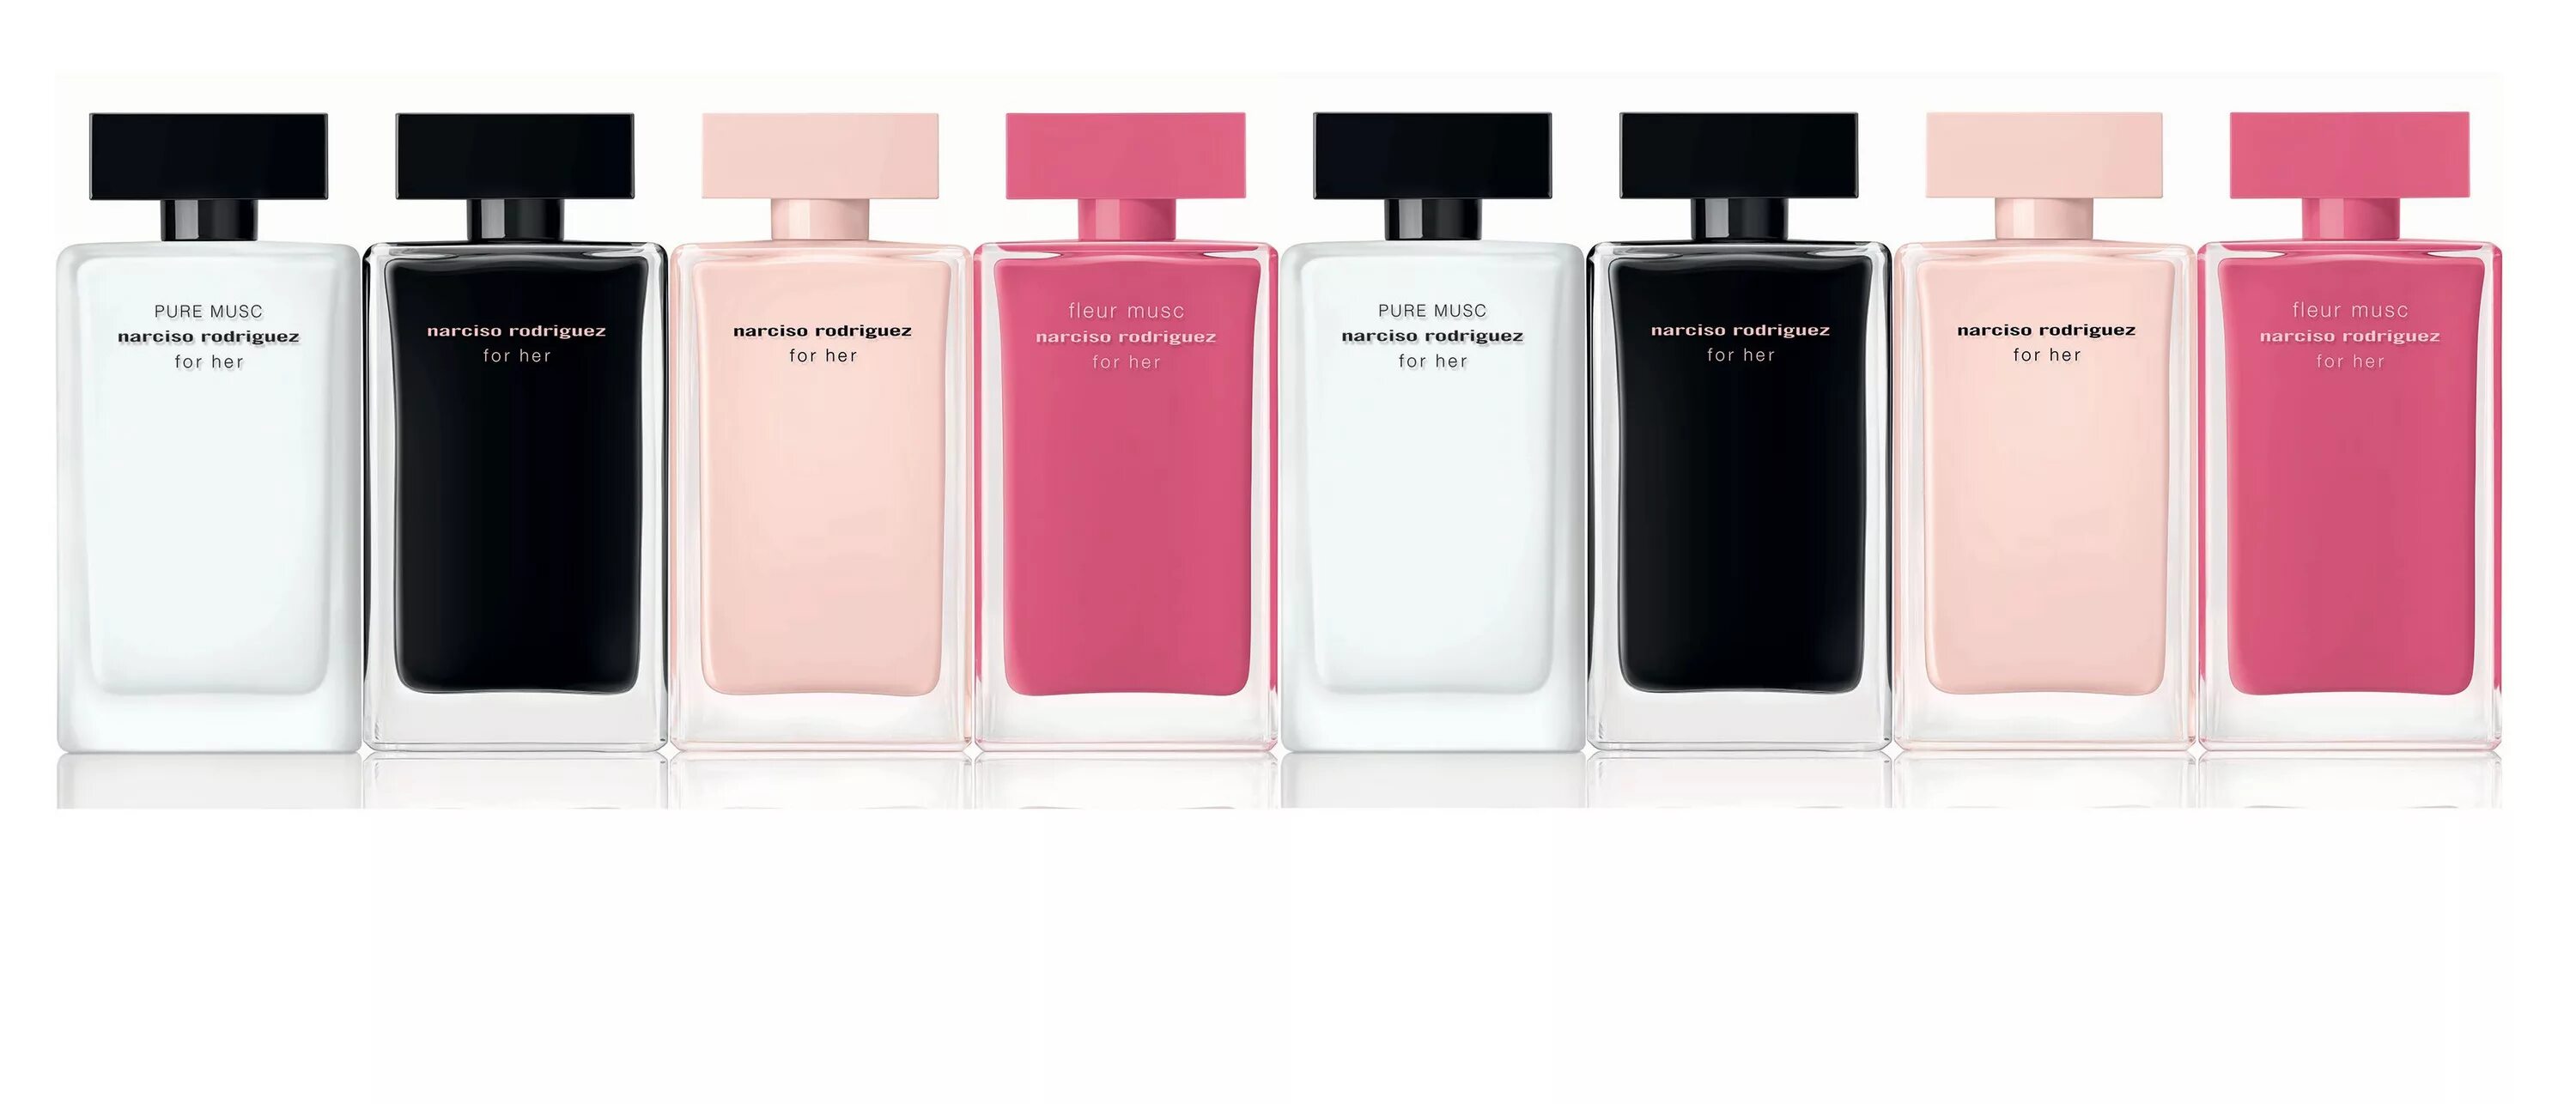 All of me narciso rodriguez. Narciso Rodriguez fleur Musc 100 мл. Narciso Rodriguez Pure Musc,100 мл. Narciso Rodriguez Musc Narciso Rodriguez Narciso. Narciso Rodriguez for her Narciso Rodriguez.